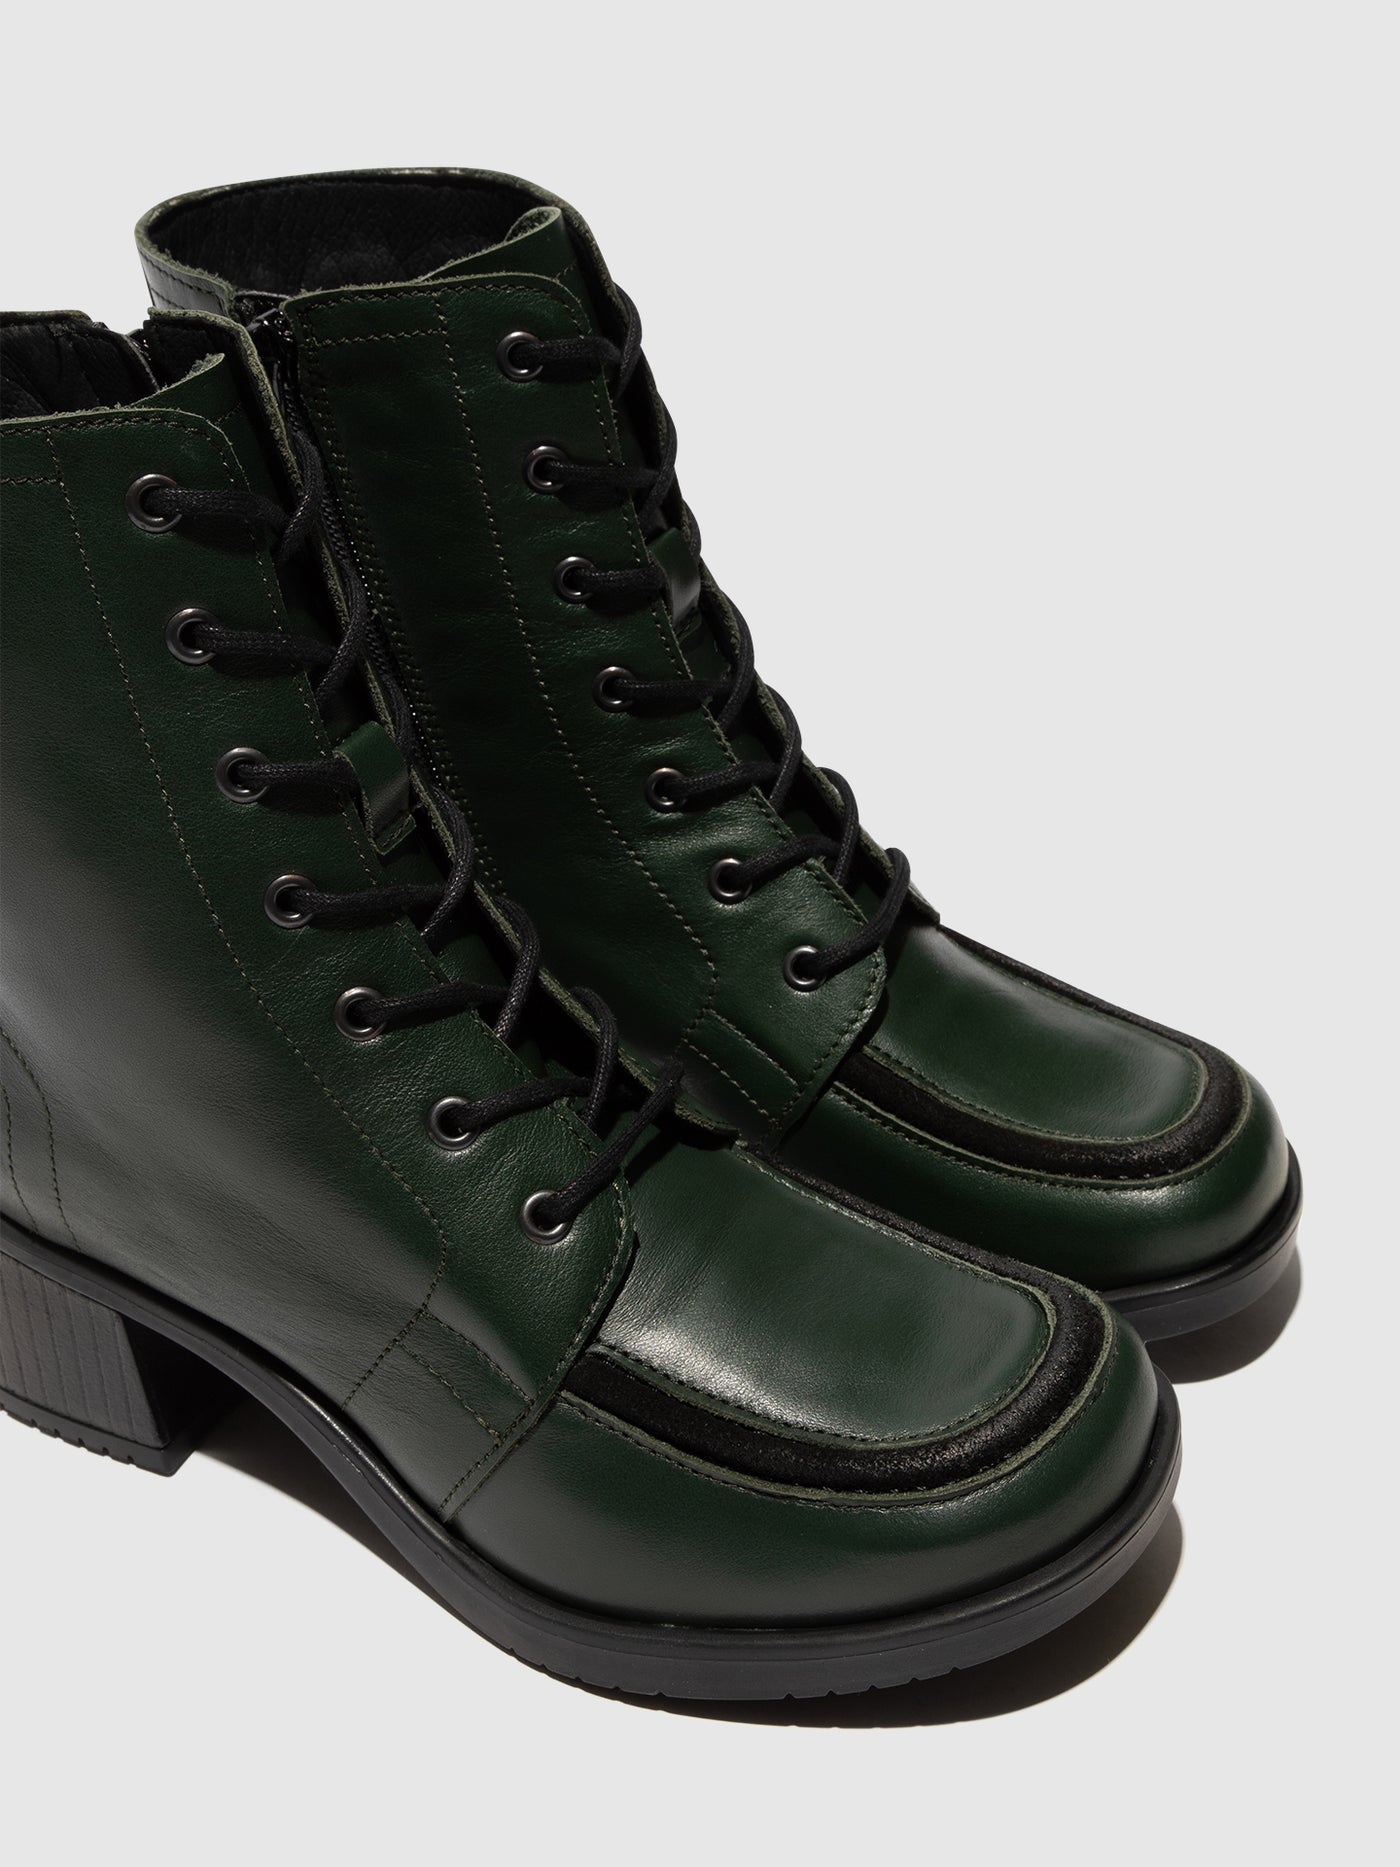 Lace-up Ankle Boots KASS017FLY DARK GREEN/BLACK